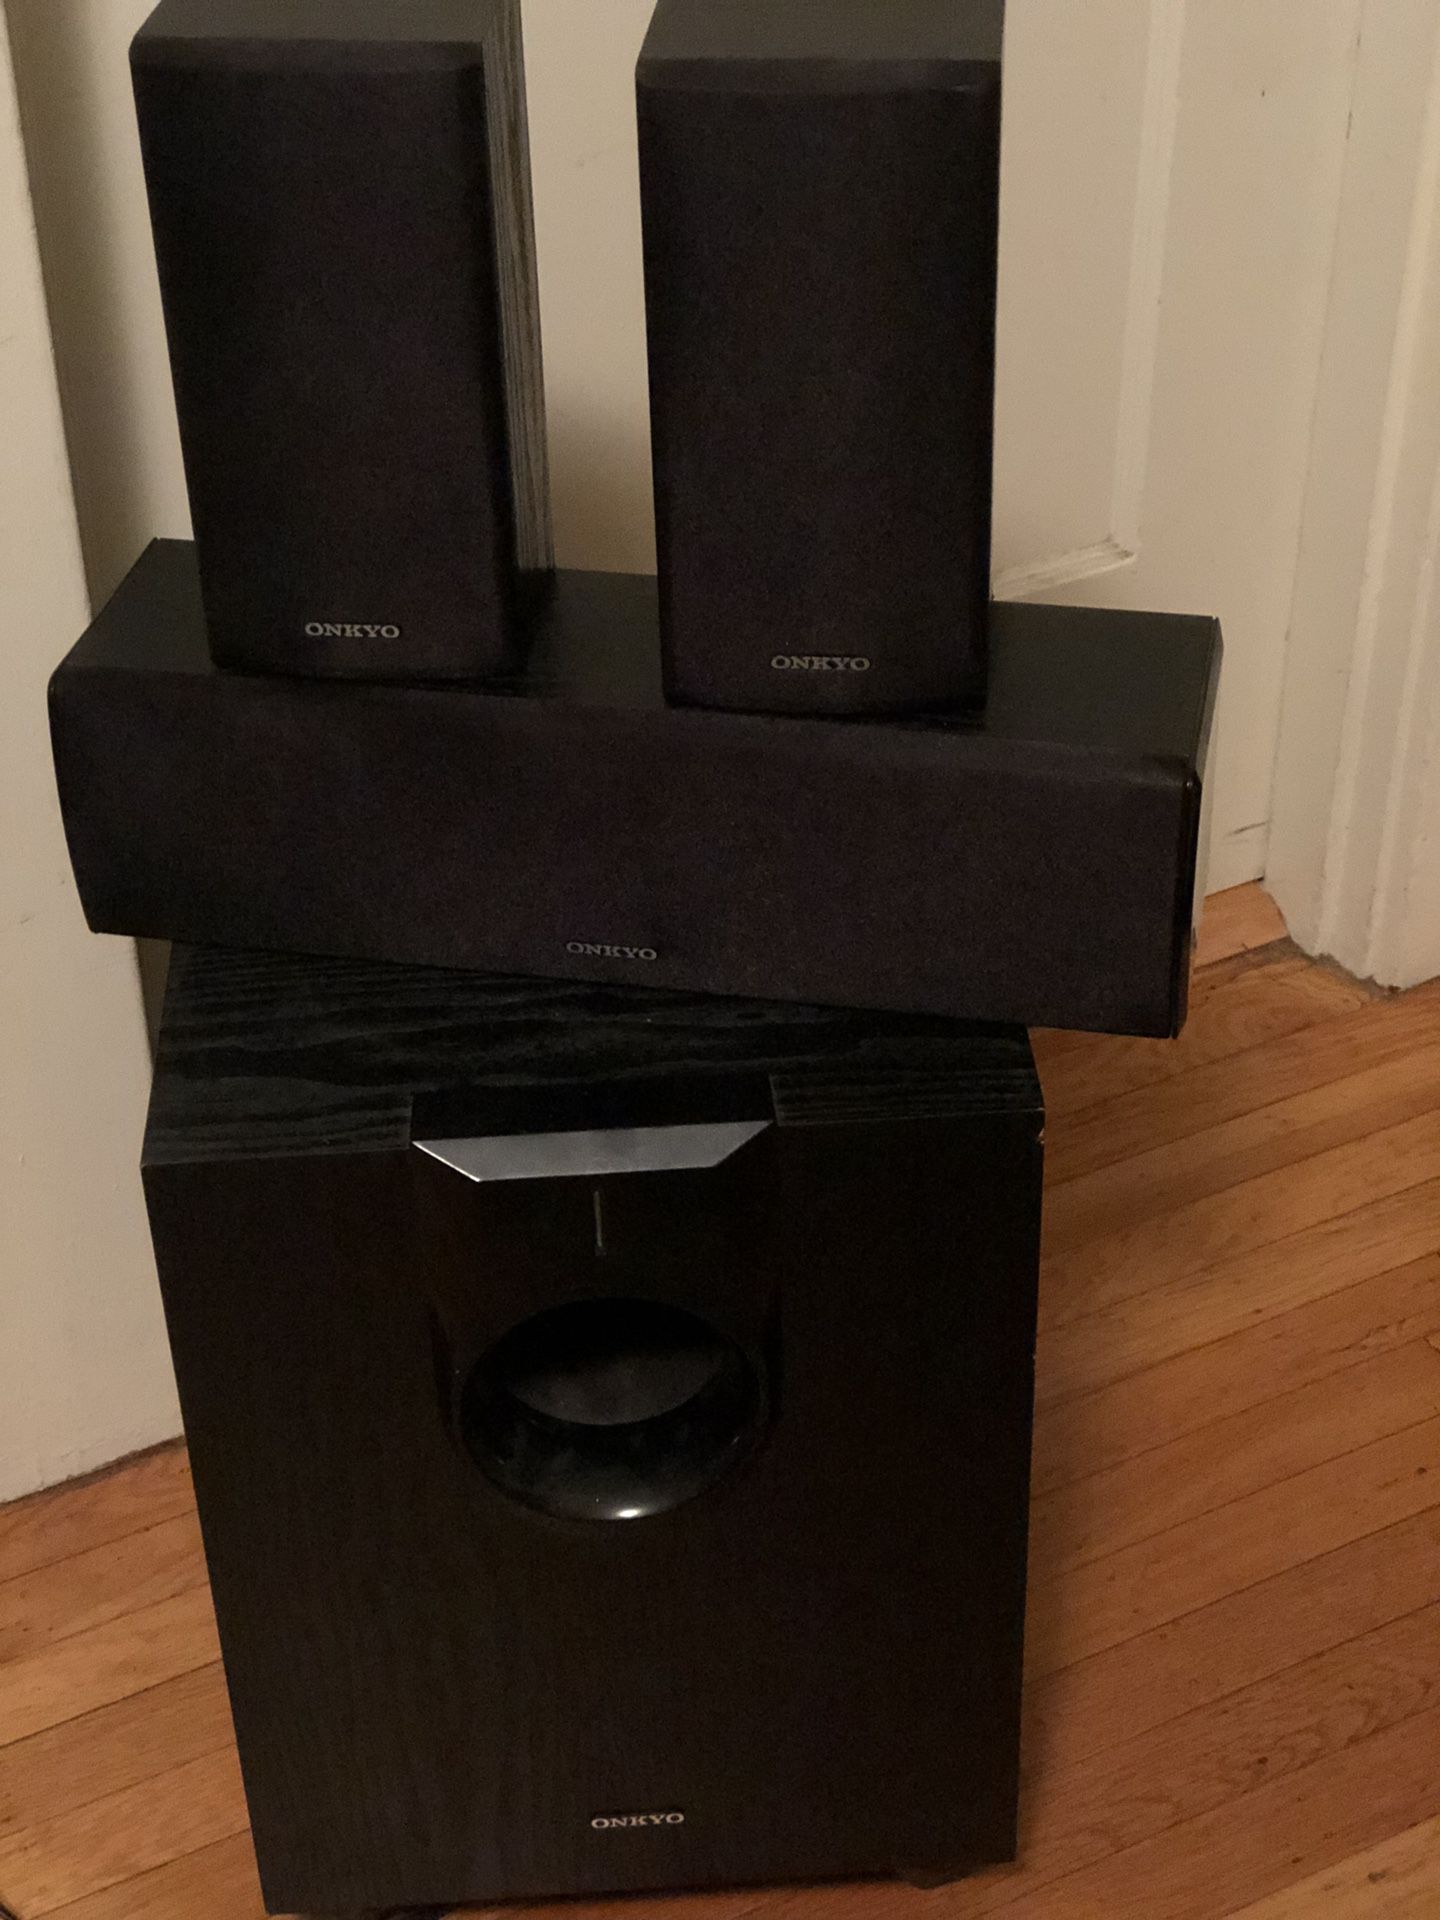 Onkyo subwoofer and surround sound speakers